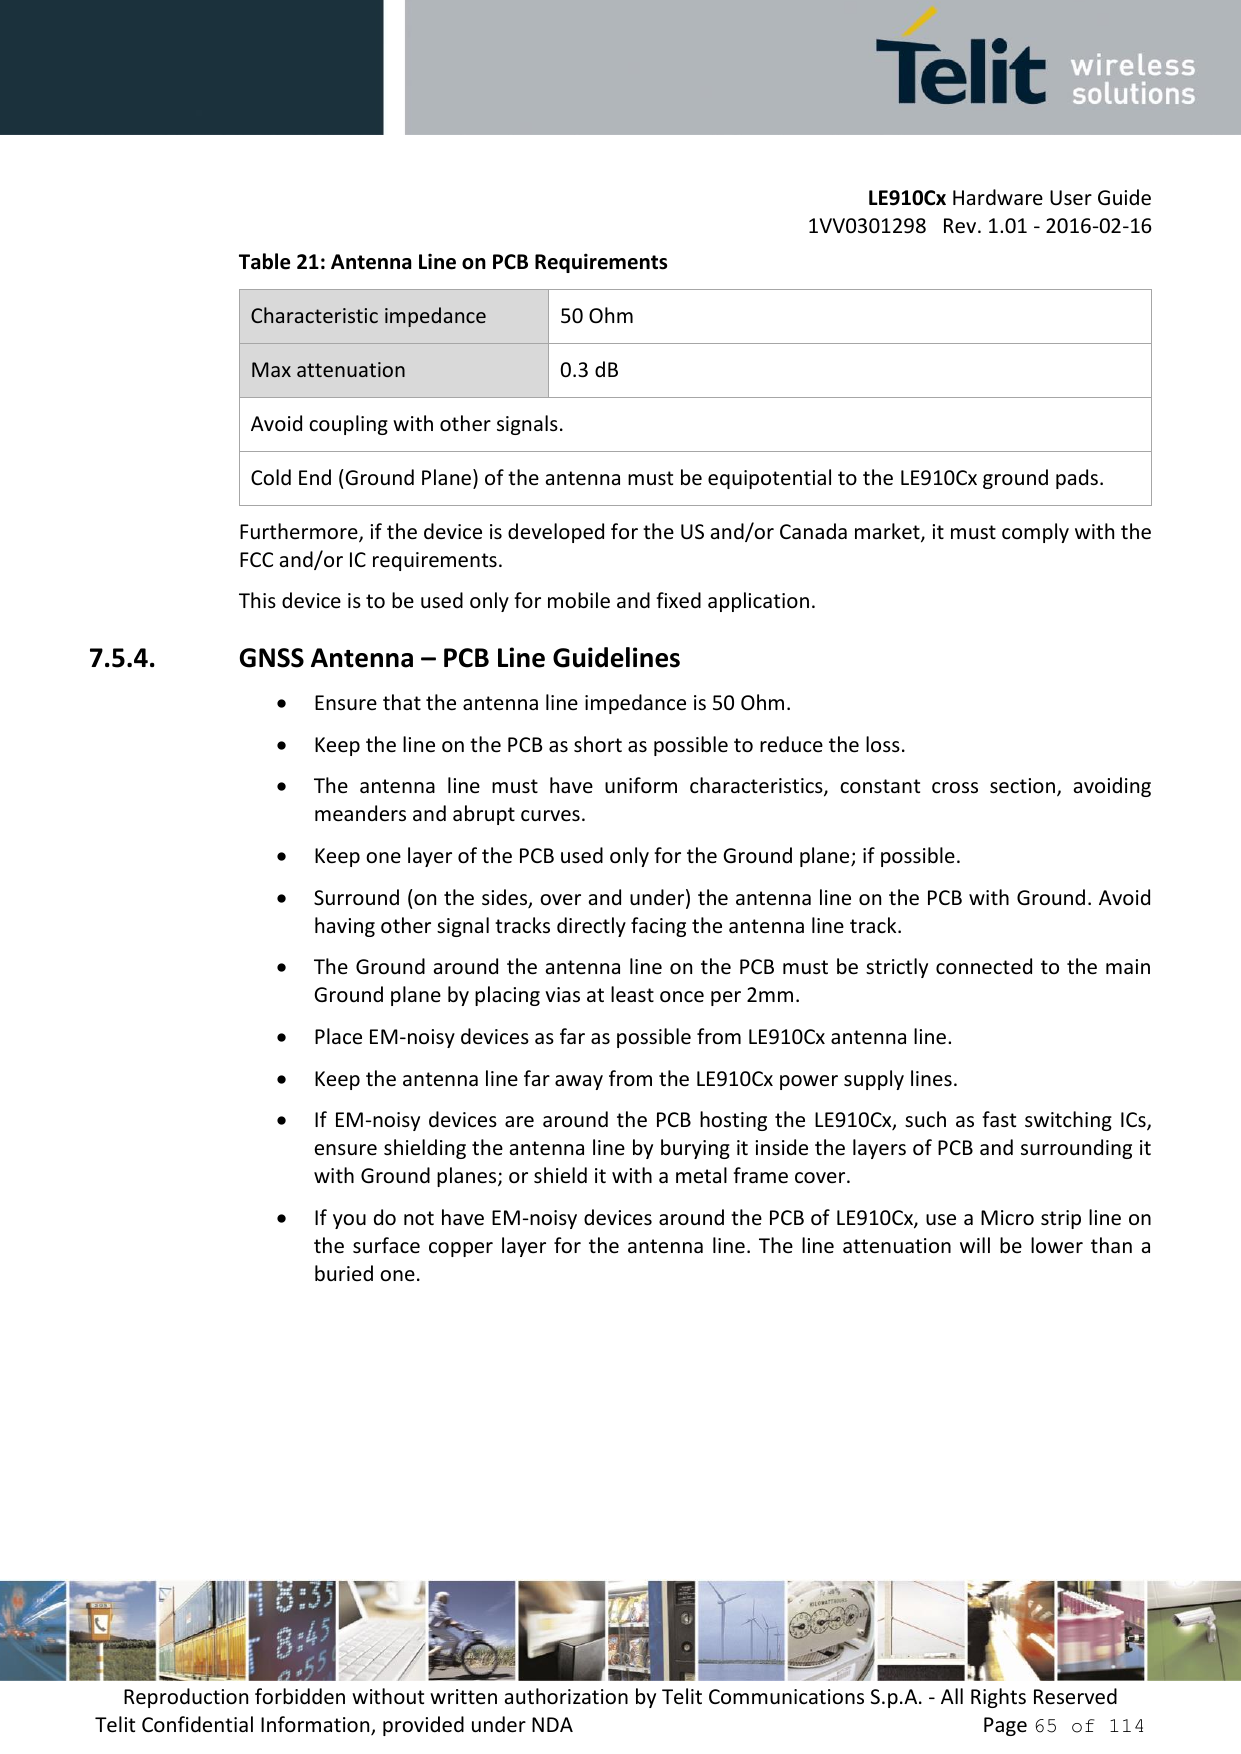         LE910Cx Hardware User Guide     1VV0301298   Rev. 1.01 - 2016-02-16 Reproduction forbidden without written authorization by Telit Communications S.p.A. - All Rights Reserved Telit Confidential Information, provided under NDA                 Page 65 of 114 Table 21: Antenna Line on PCB Requirements Characteristic impedance 50 Ohm Max attenuation 0.3 dB Avoid coupling with other signals. Cold End (Ground Plane) of the antenna must be equipotential to the LE910Cx ground pads. Furthermore, if the device is developed for the US and/or Canada market, it must comply with the FCC and/or IC requirements. This device is to be used only for mobile and fixed application.   7.5.4. GNSS Antenna – PCB Line Guidelines  Ensure that the antenna line impedance is 50 Ohm.  Keep the line on the PCB as short as possible to reduce the loss.  The  antenna  line  must  have  uniform  characteristics,  constant  cross  section,  avoiding meanders and abrupt curves.  Keep one layer of the PCB used only for the Ground plane; if possible.  Surround (on the sides, over and under) the antenna line on the PCB with Ground. Avoid having other signal tracks directly facing the antenna line track.  The Ground around the antenna line on the PCB must be strictly connected to the main Ground plane by placing vias at least once per 2mm.  Place EM-noisy devices as far as possible from LE910Cx antenna line.  Keep the antenna line far away from the LE910Cx power supply lines.   If EM-noisy devices are around the PCB  hosting the LE910Cx, such as fast switching ICs, ensure shielding the antenna line by burying it inside the layers of PCB and surrounding it with Ground planes; or shield it with a metal frame cover.  If you do not have EM-noisy devices around the PCB of LE910Cx, use a Micro strip line on the surface copper layer  for the antenna line. The line attenuation will be lower than a buried one.   